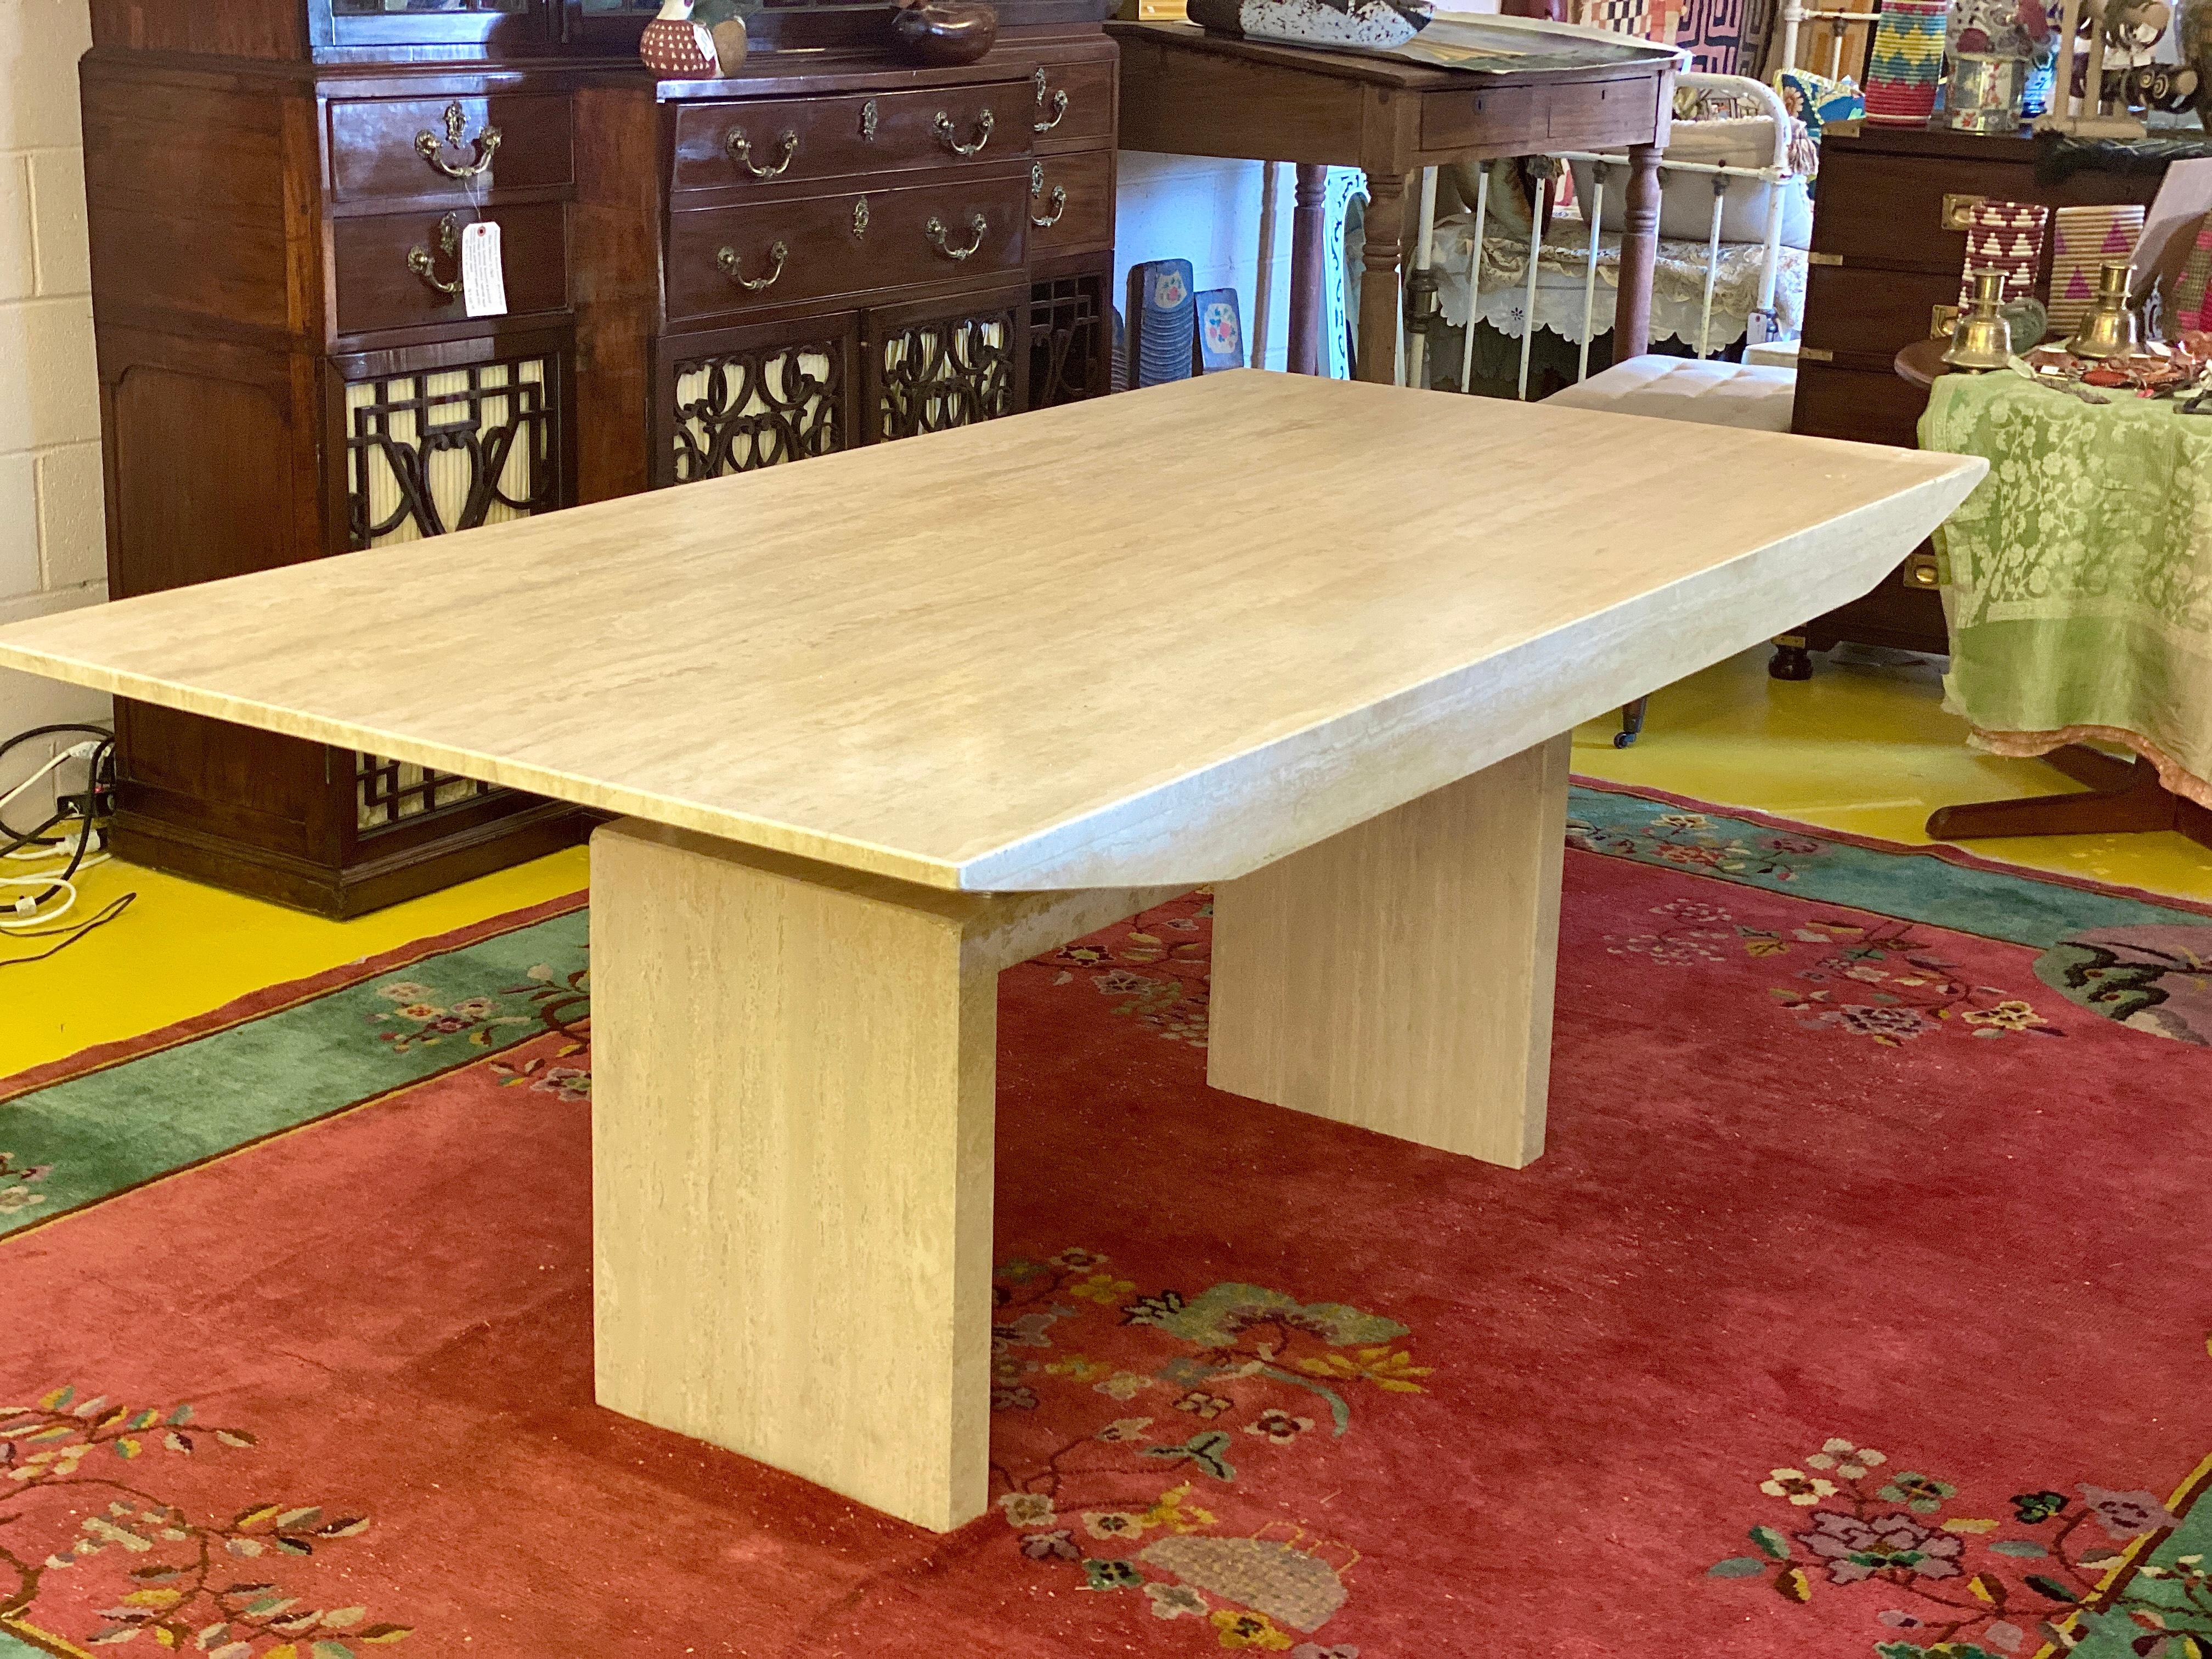 This beautiful Mid-Century Modern white marble dining table has an incredible sculptural form and striking luster. It has a wonderfully smooth feel. The 3